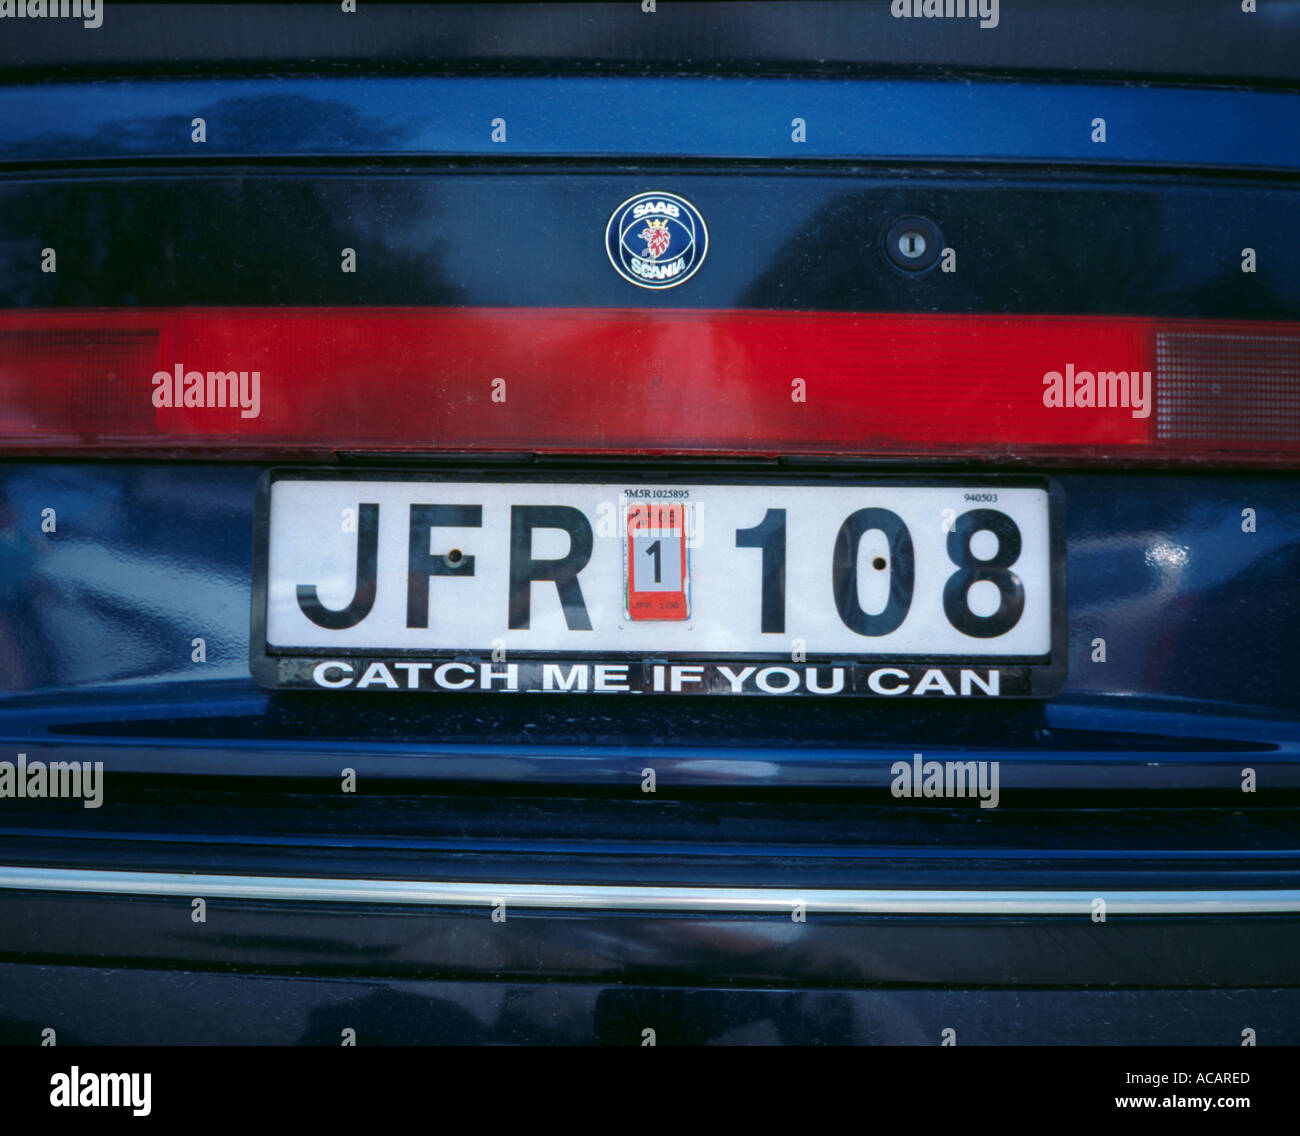 'Catch me if you can'. rear number plate on a Swedish car Stock Photo